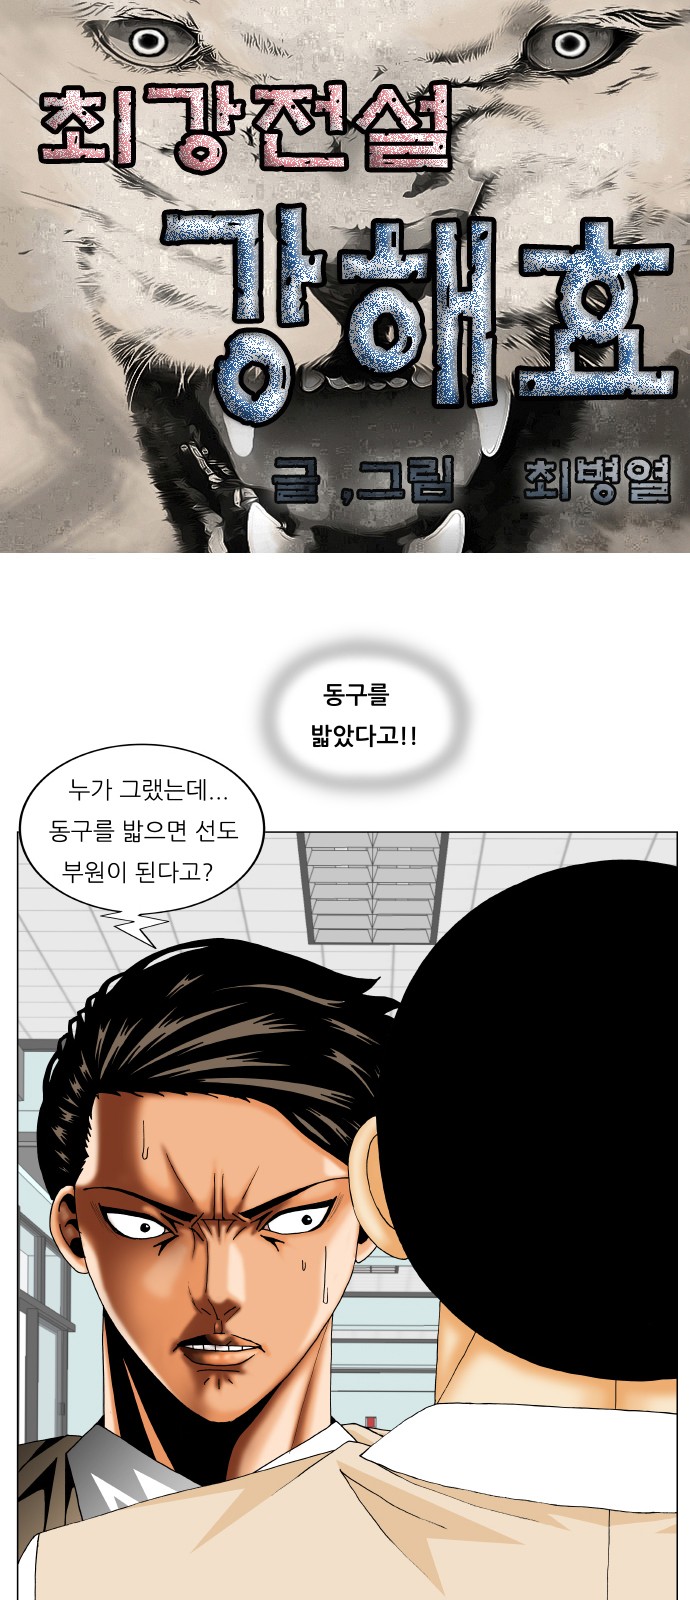 Ultimate Legend - Kang Hae Hyo - Chapter 206 - Page 1